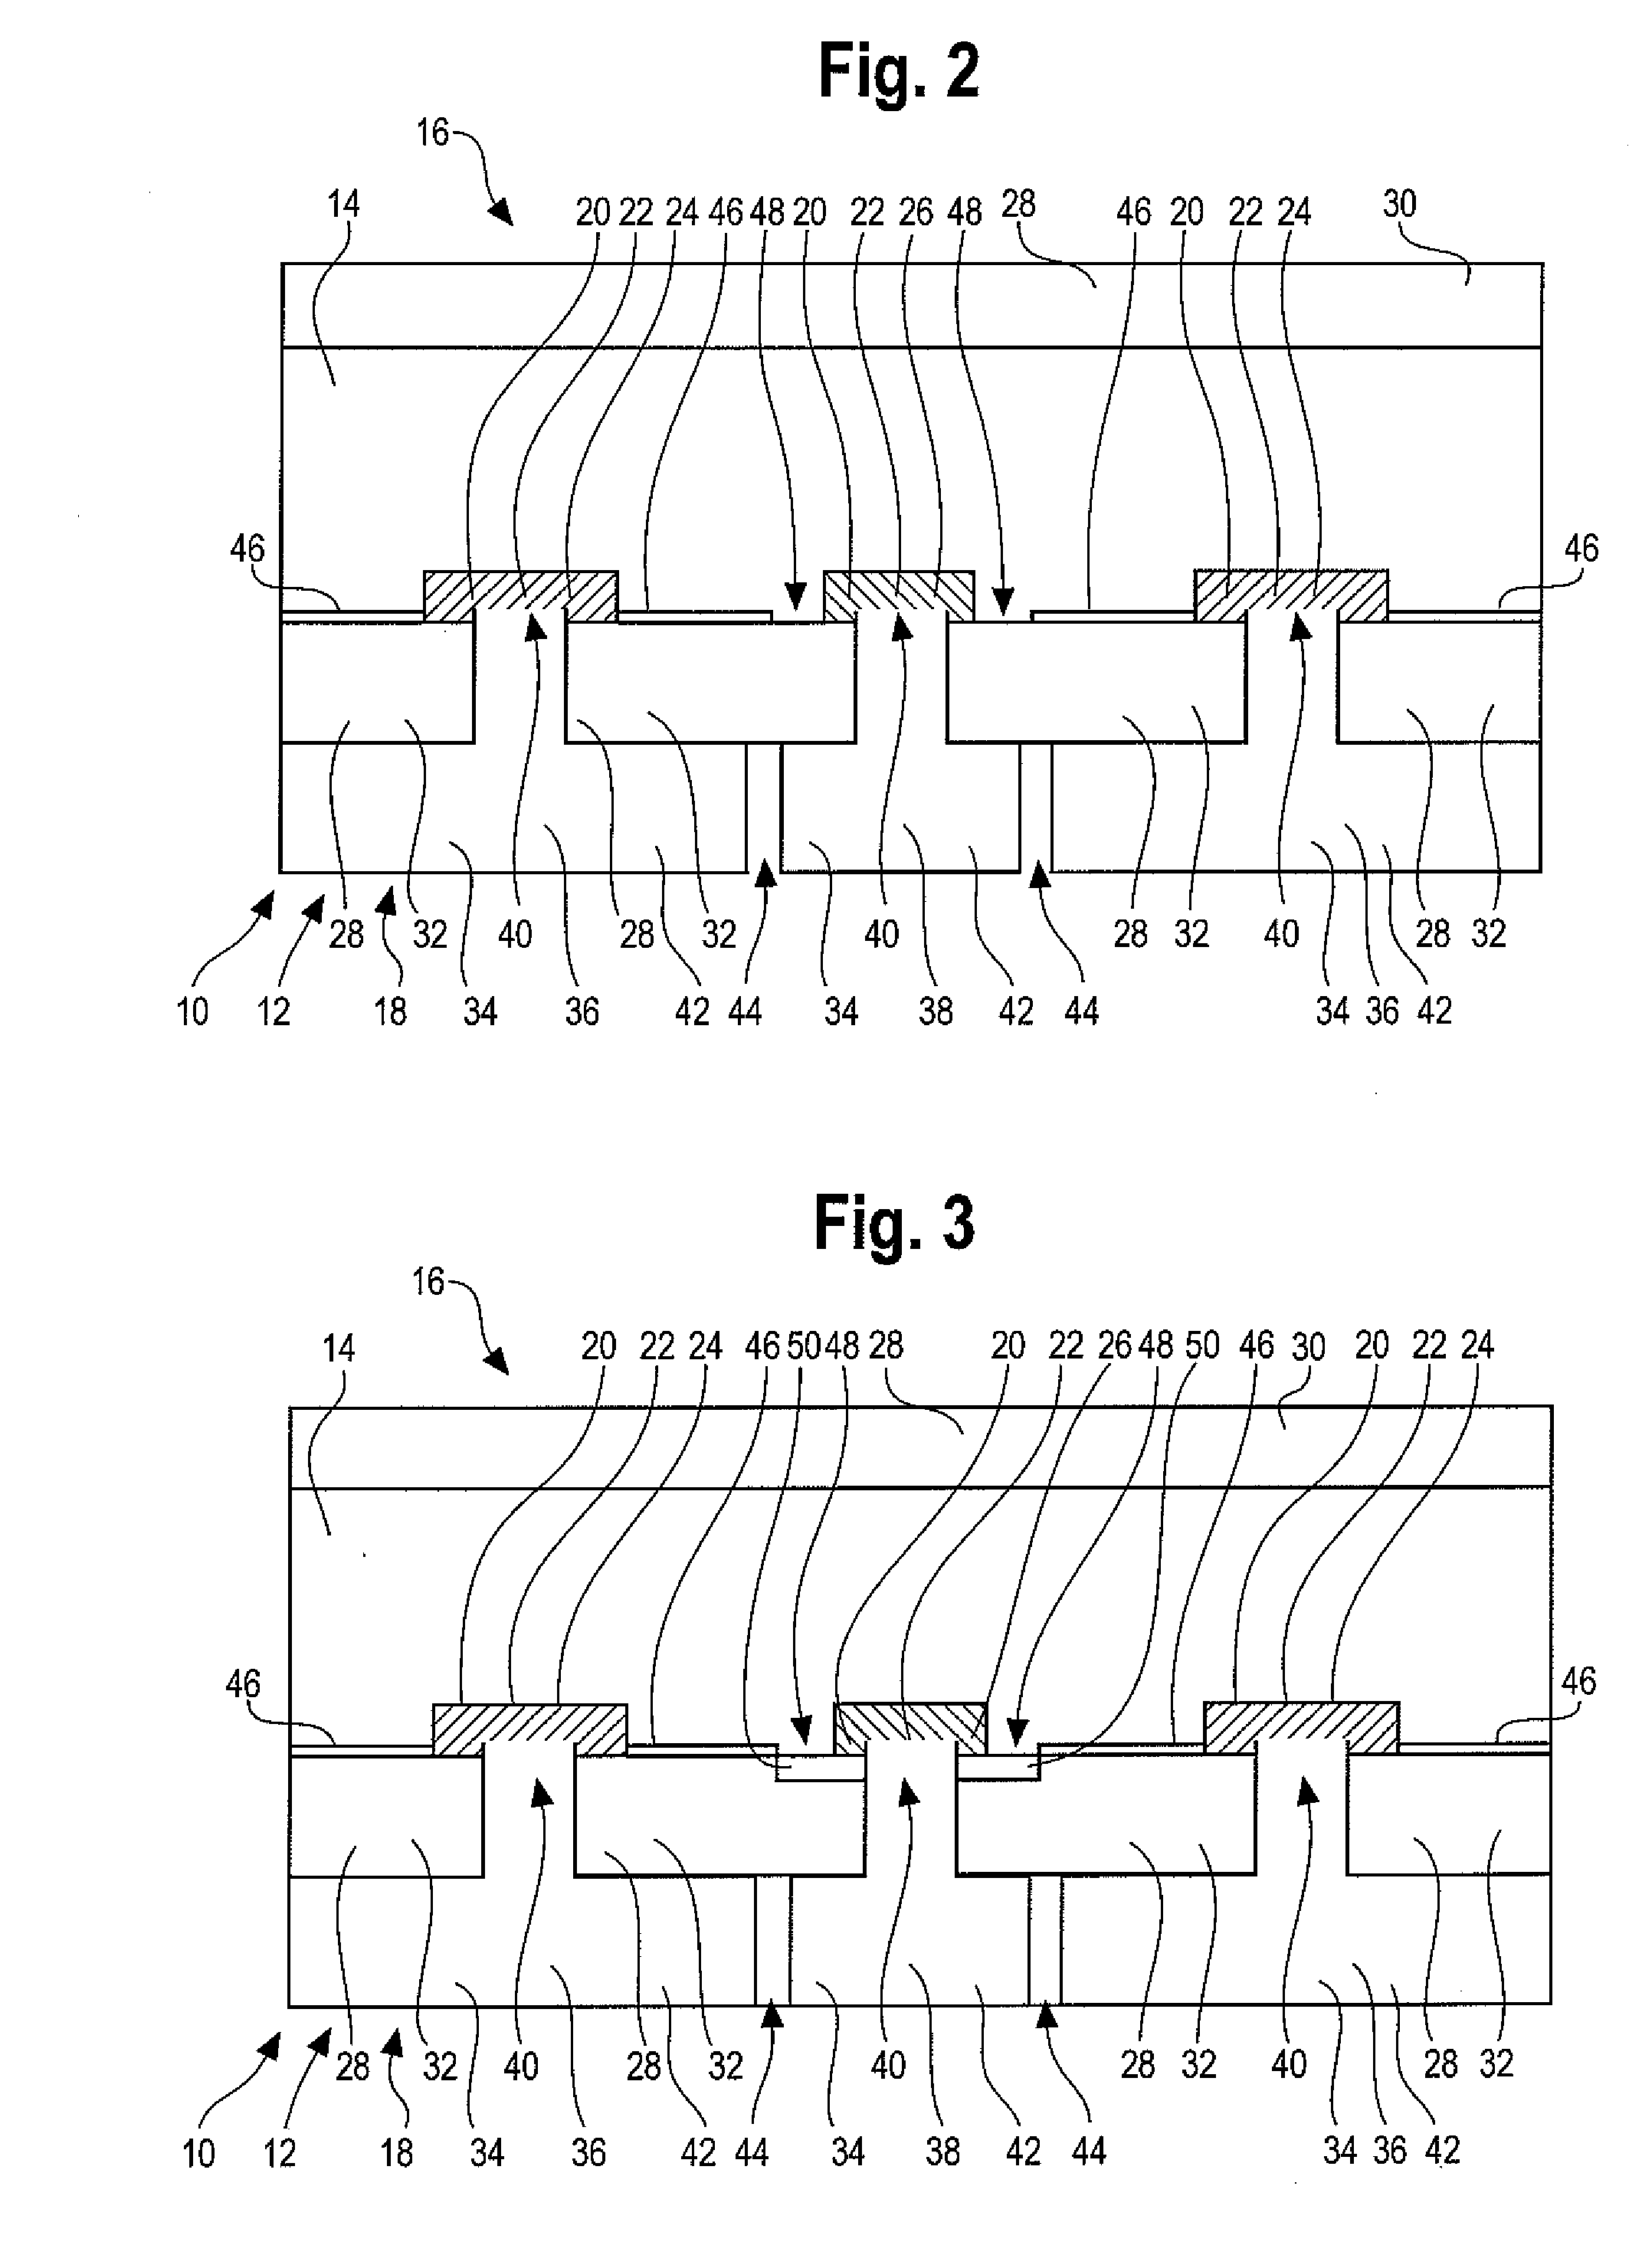 Apparatus and Method for Solar Cells with Laser Fired Contacts in Thermally Diffused Doped Regions